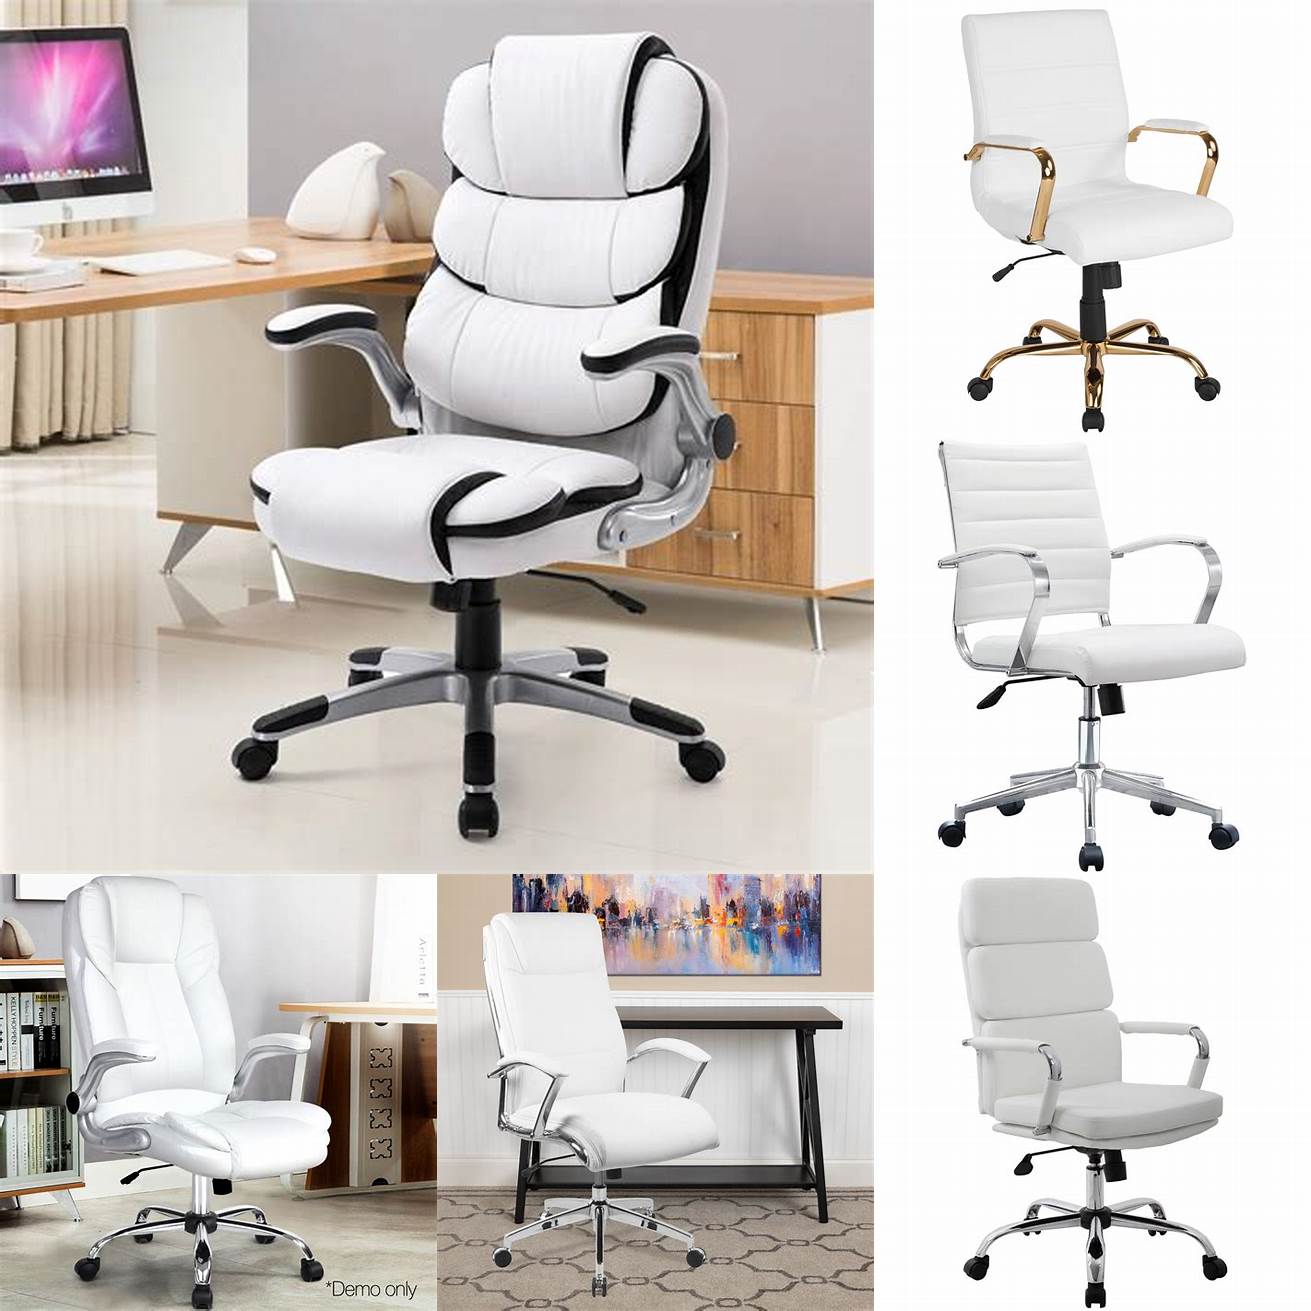 A white leather office chair with adjustable features